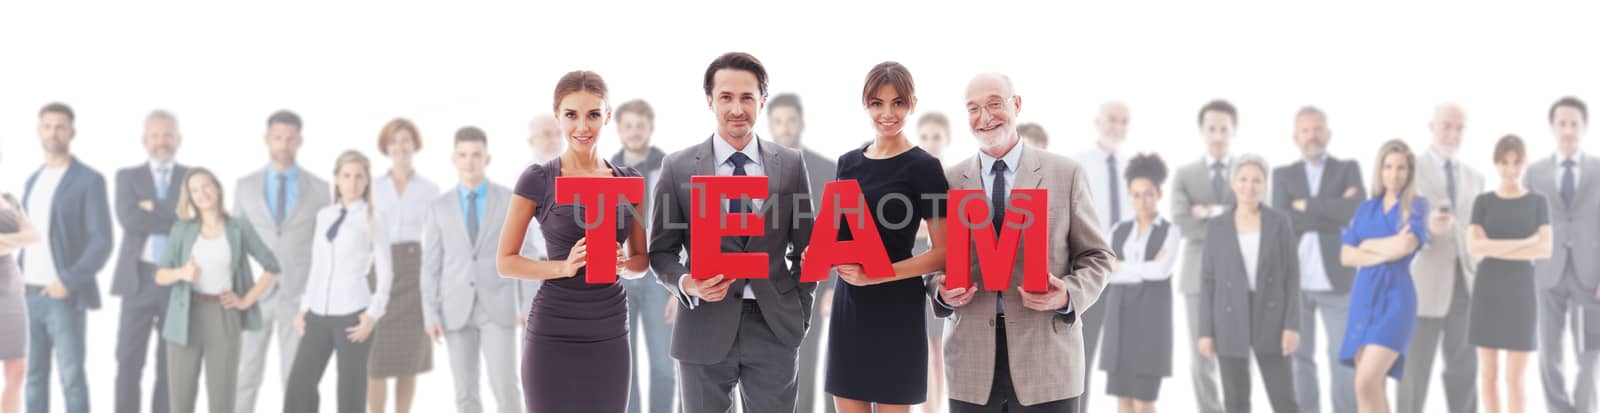 Business people team by ALotOfPeople